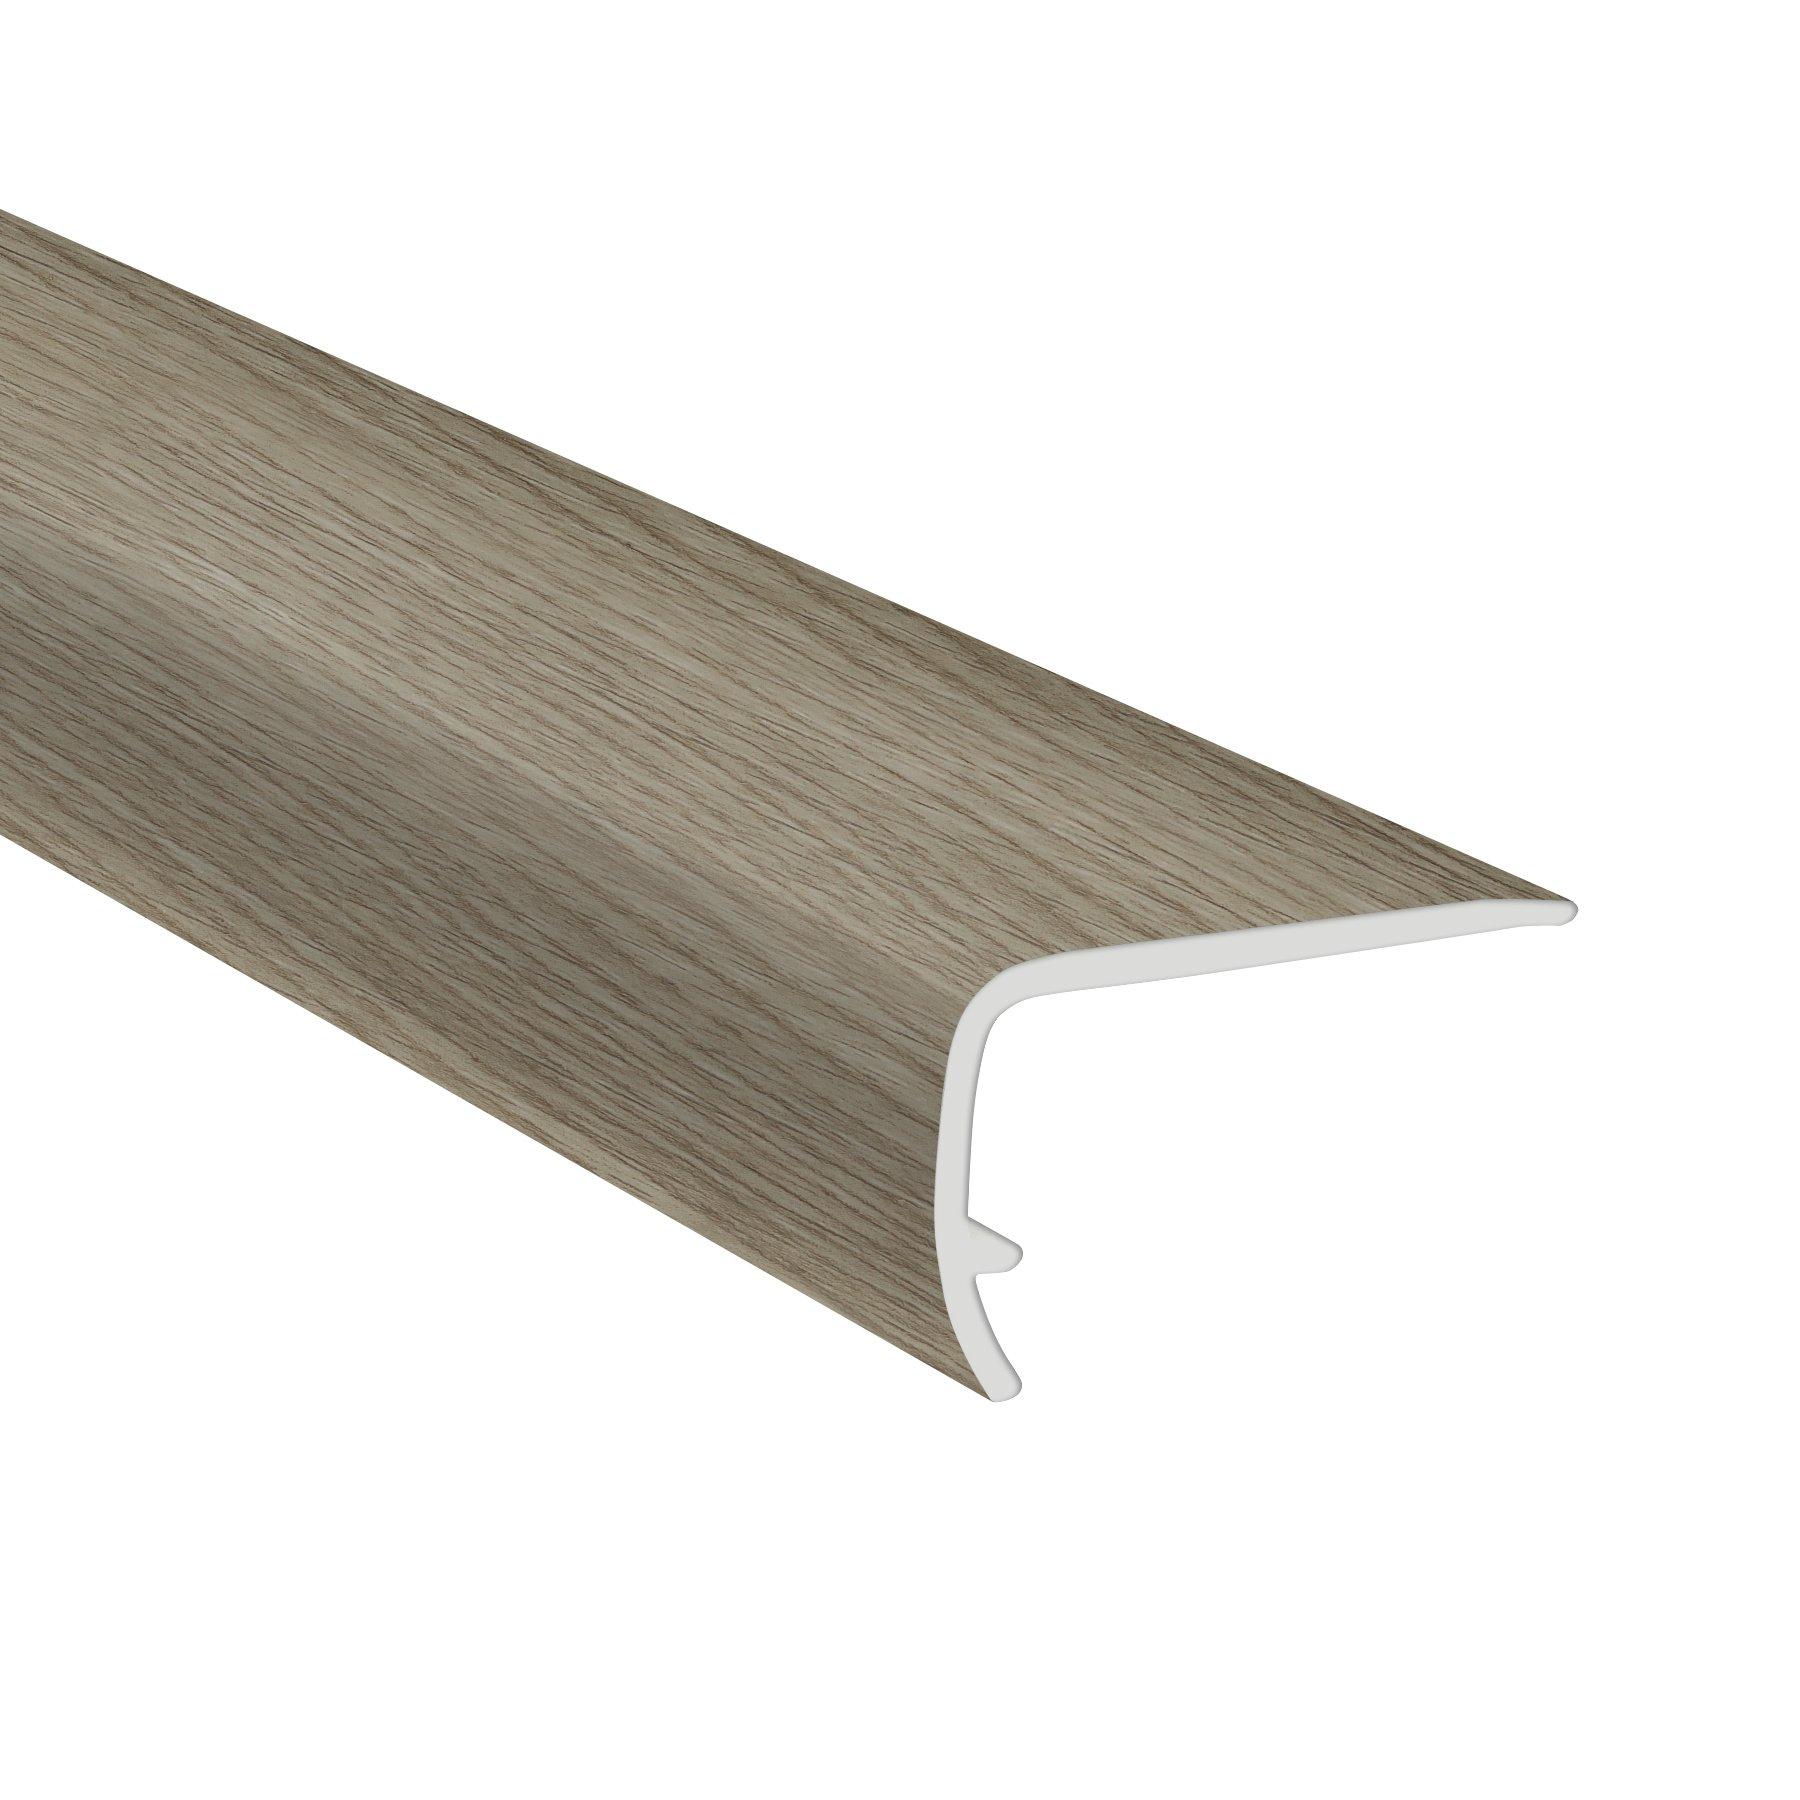 Boca Chica 94in. Vinyl Overlapping Stair Nose